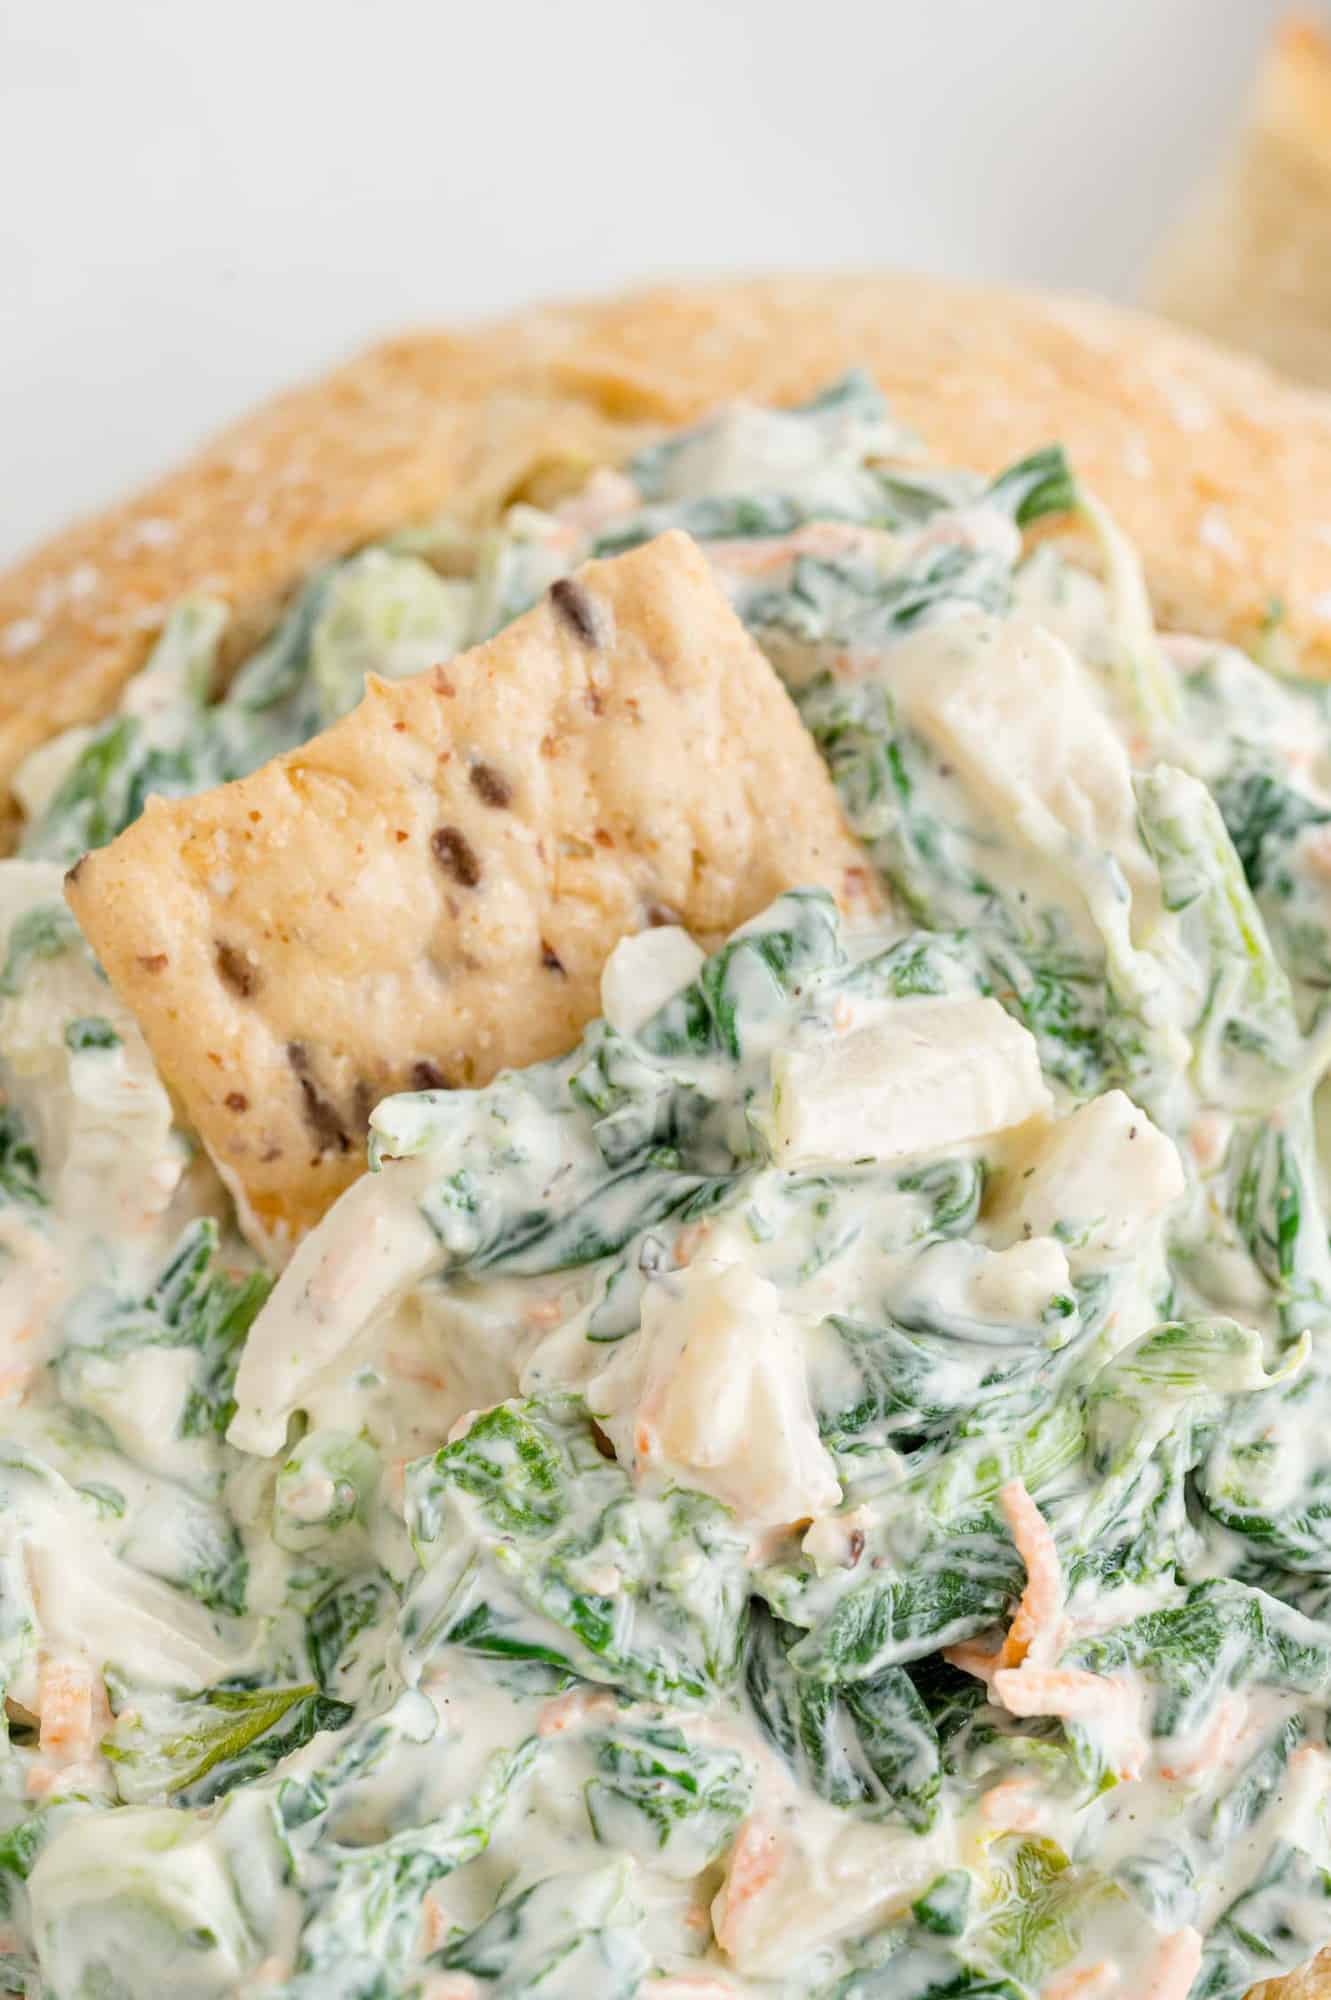 Spinach dip with a cracker in it.